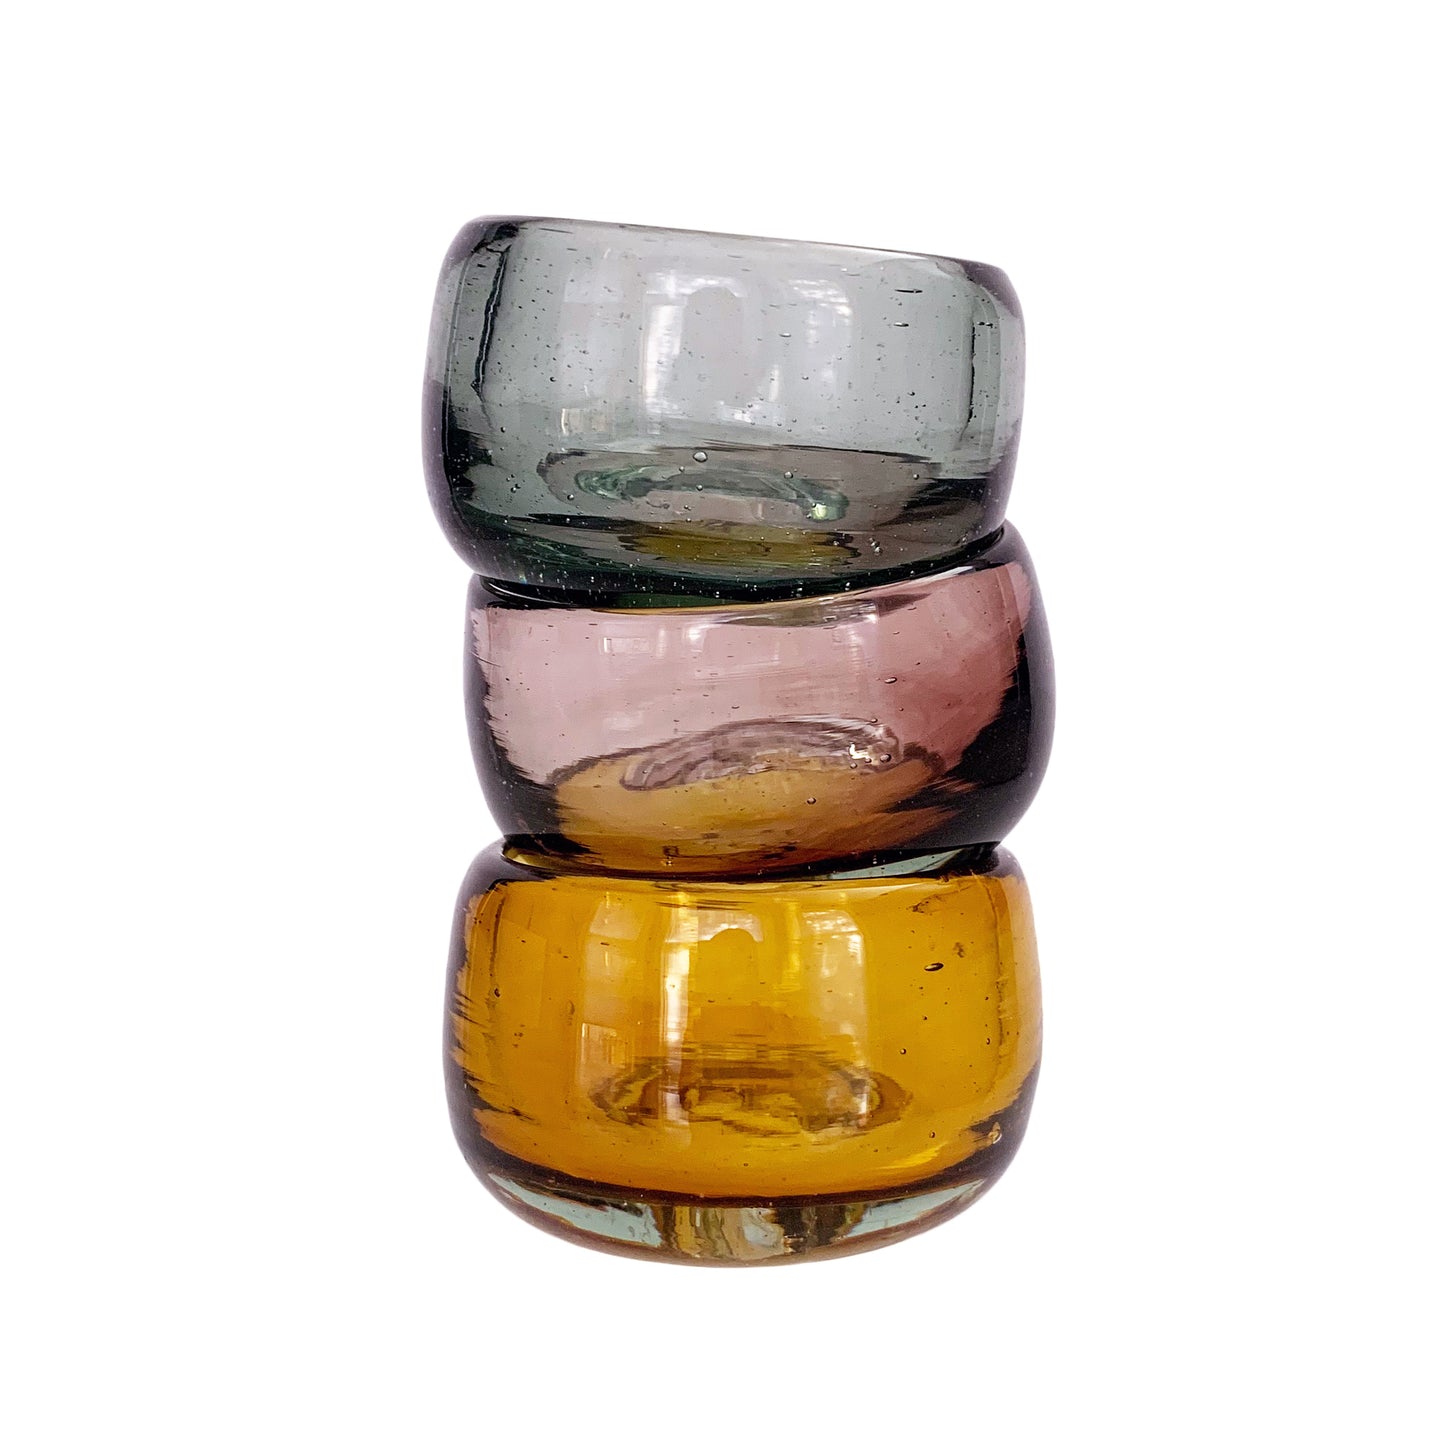 Hand Blown Mezcal + Tequila Glasses | Mezcal Copitas | Made in Mexico - Set of 2 (5 Colors Available)